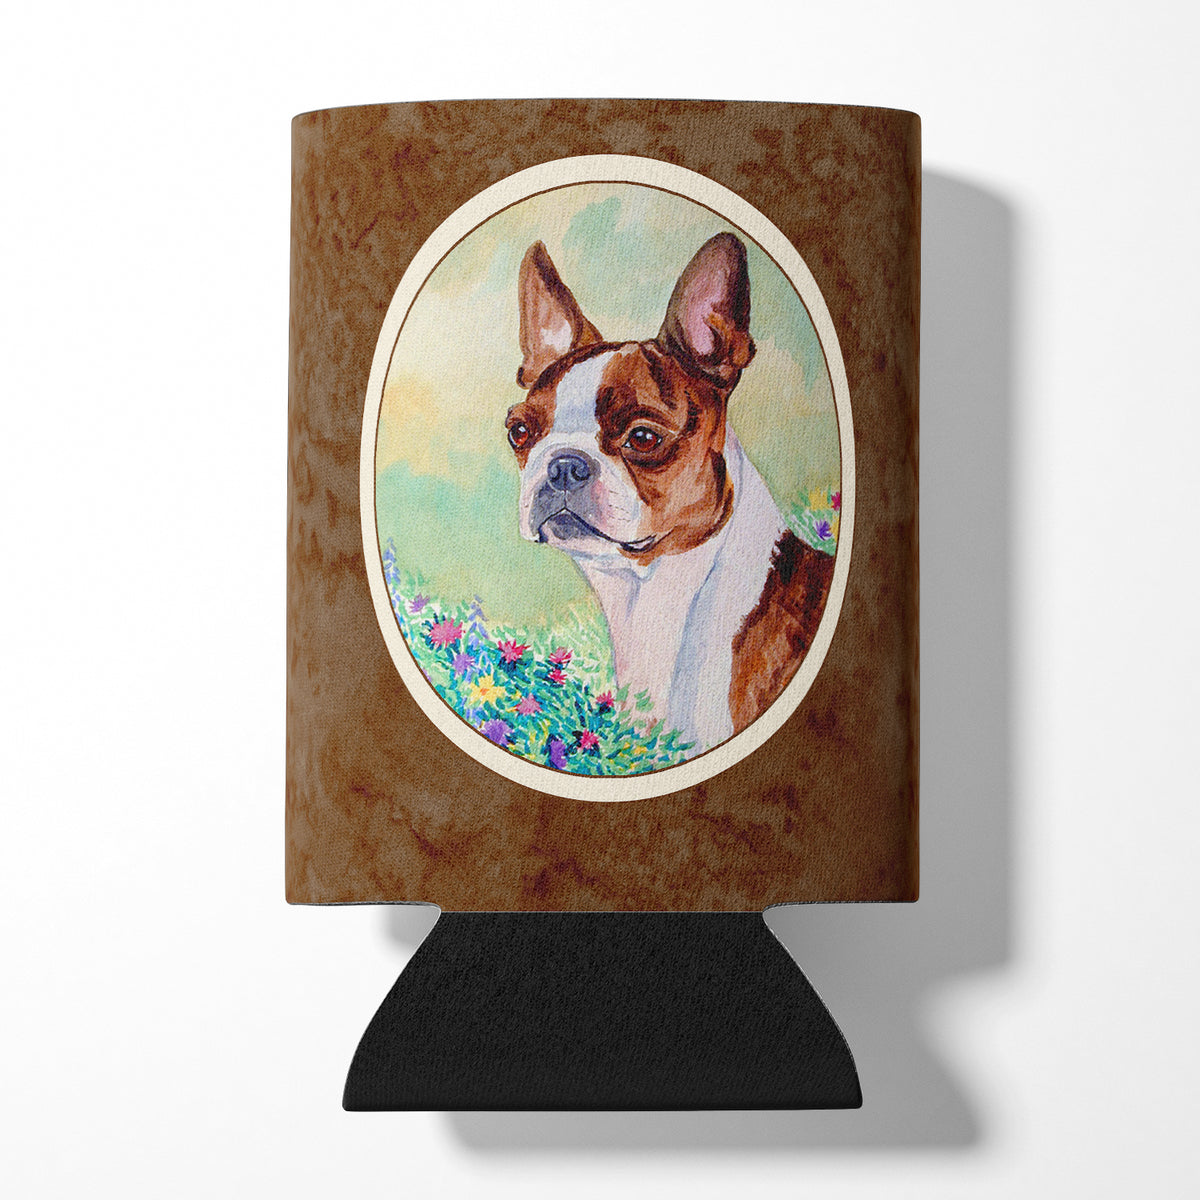 Red and White Boston Terrier Can or Bottle Hugger 7222CC.